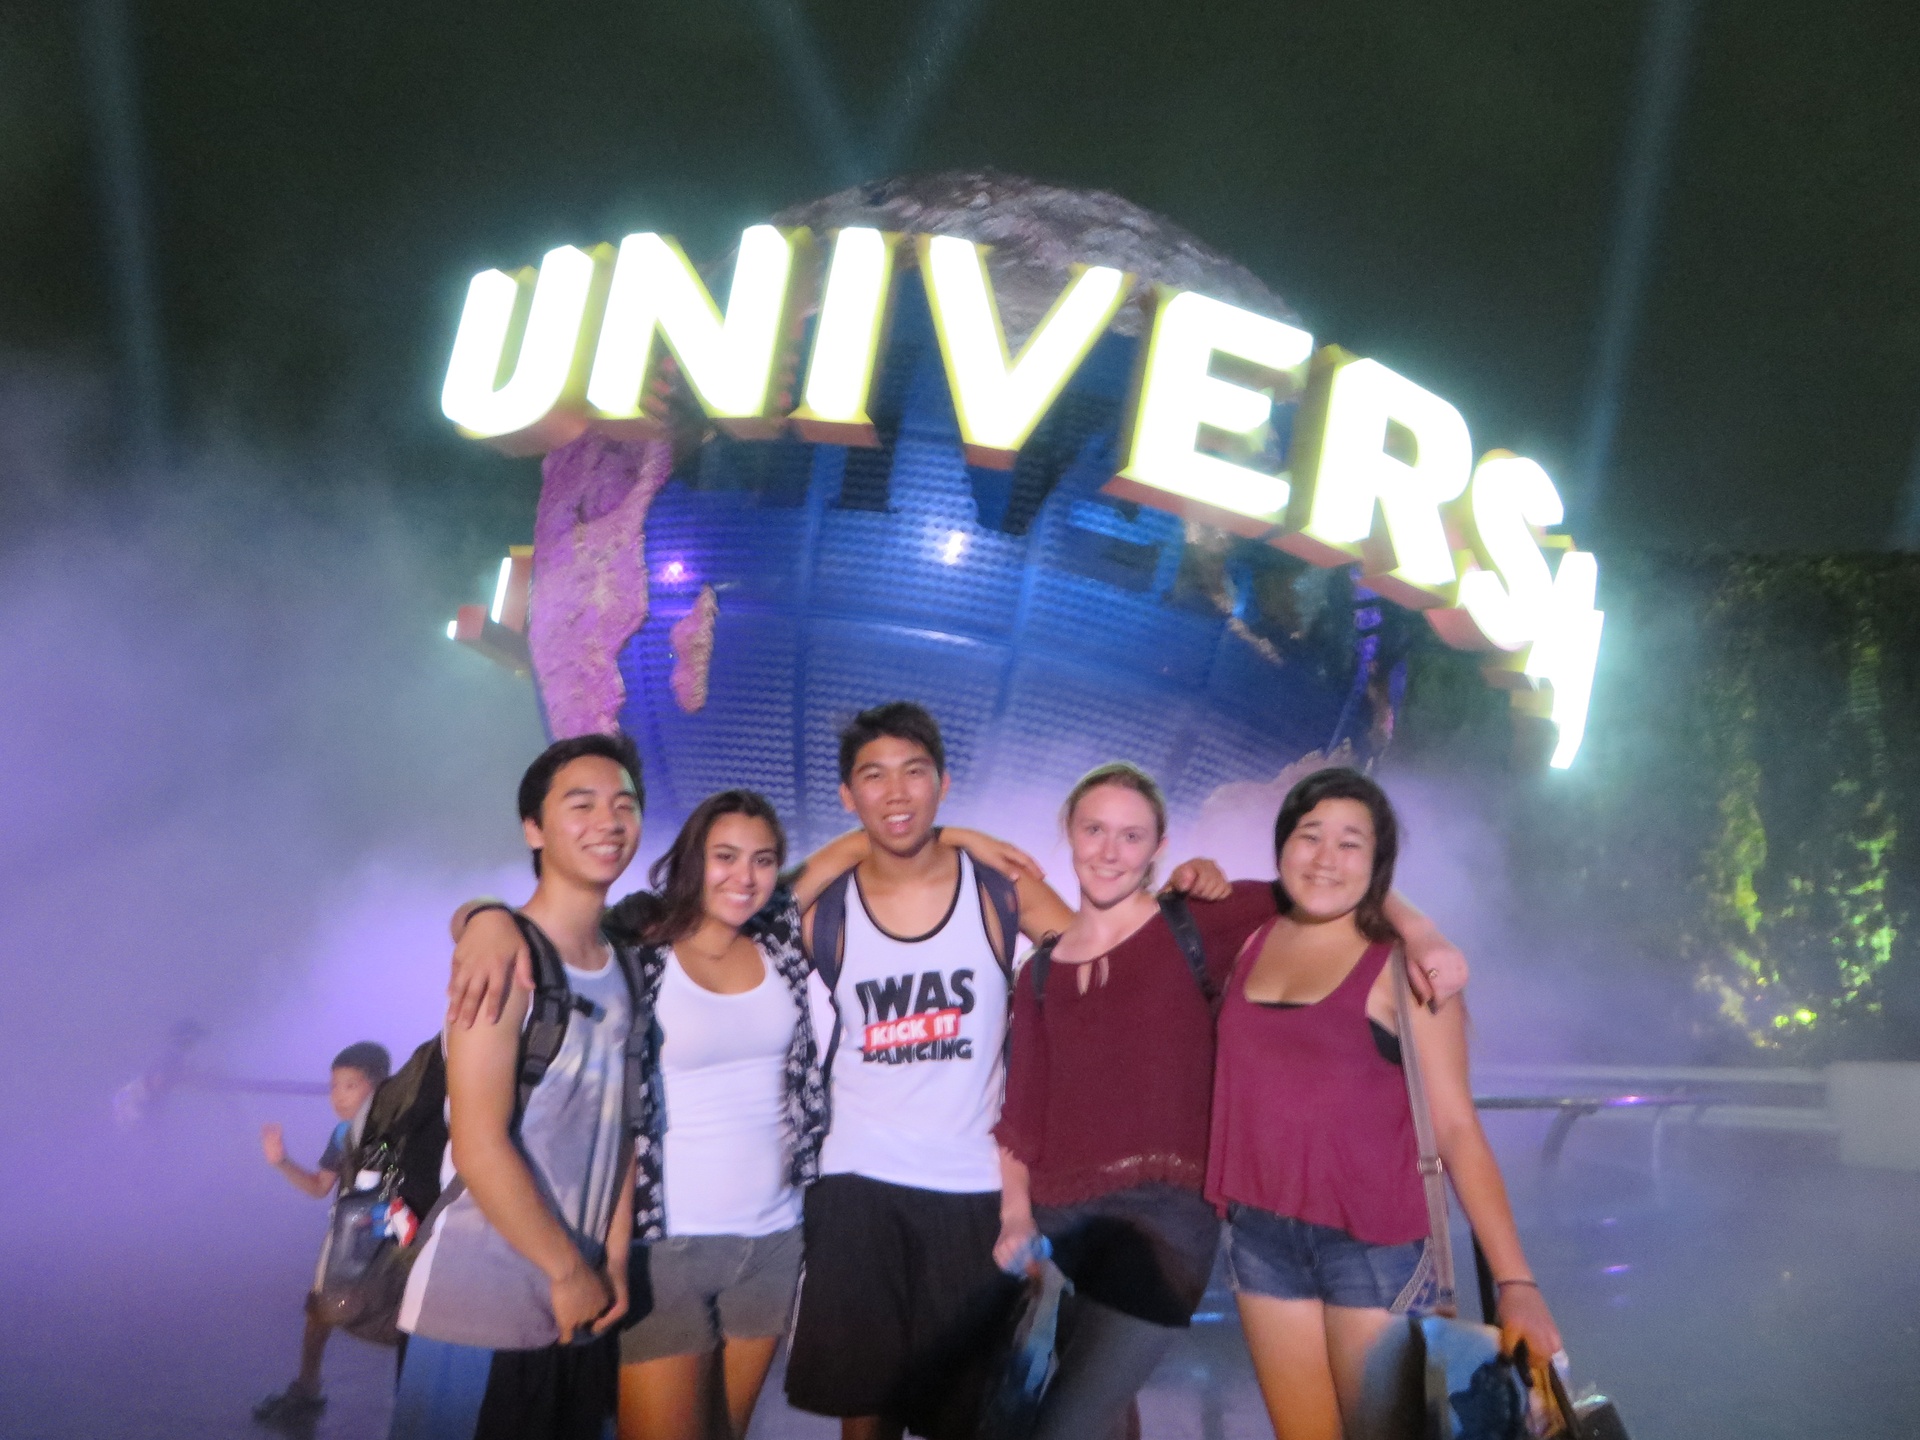 Students in front of Universal Studios sign in Japan